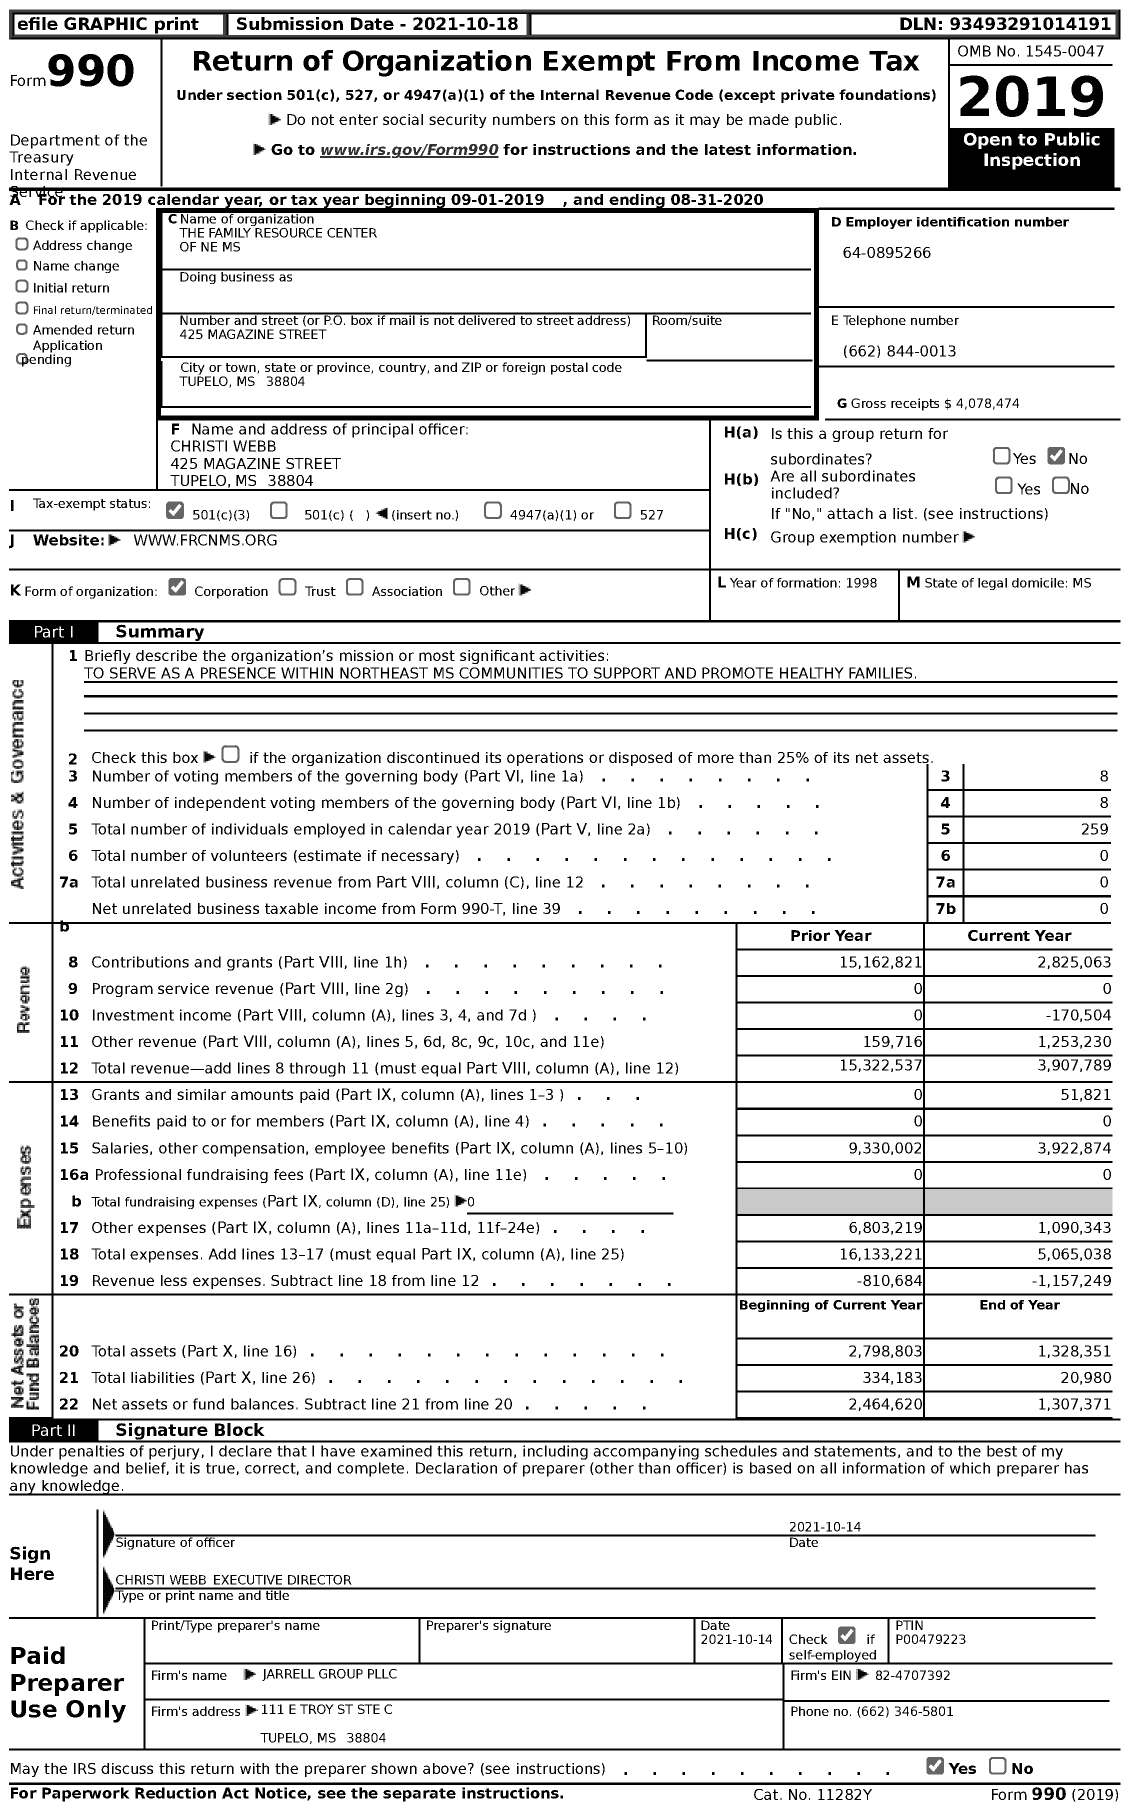 Image of first page of 2019 Form 990 for The Family Resource Center of Ne MS